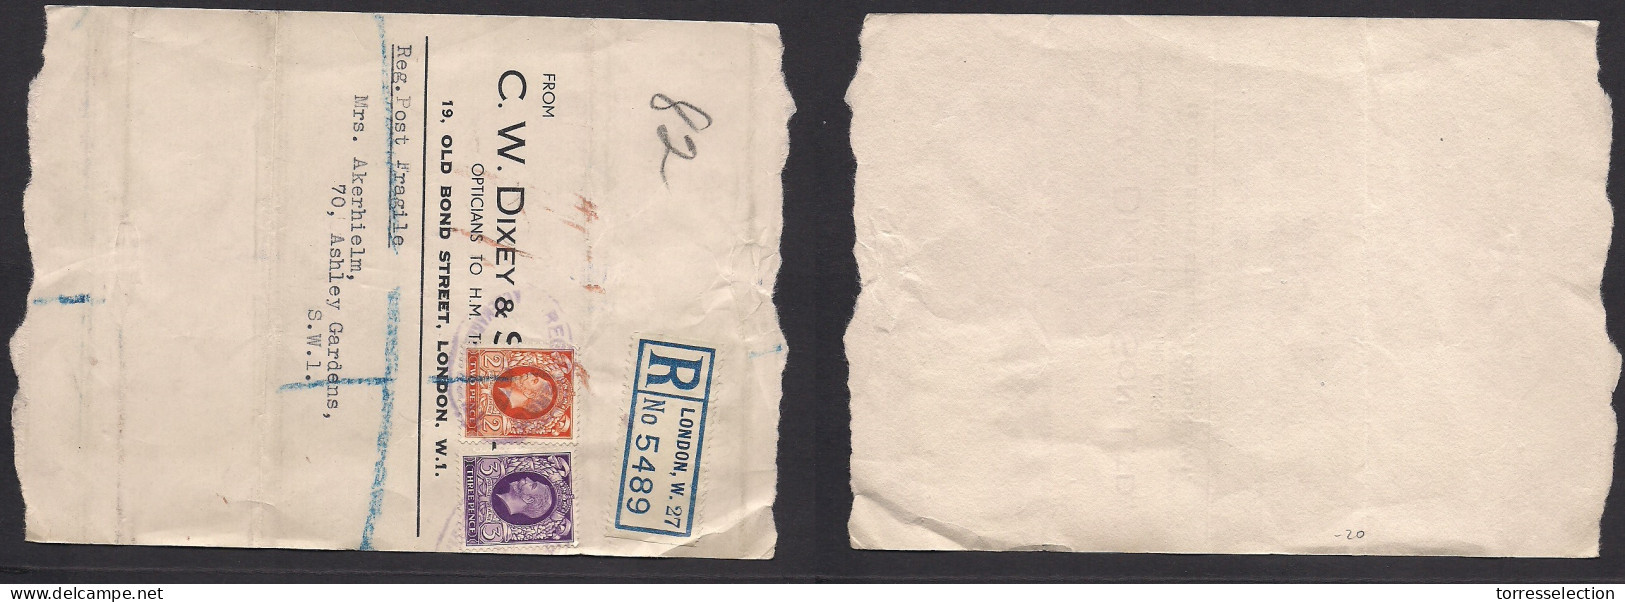 Great Britain - XX. 1937. London Local Registered C. W Dixey Cº Wrapper, At 5d Rate, Lilac Ds. XSALE. - ...-1840 Prephilately